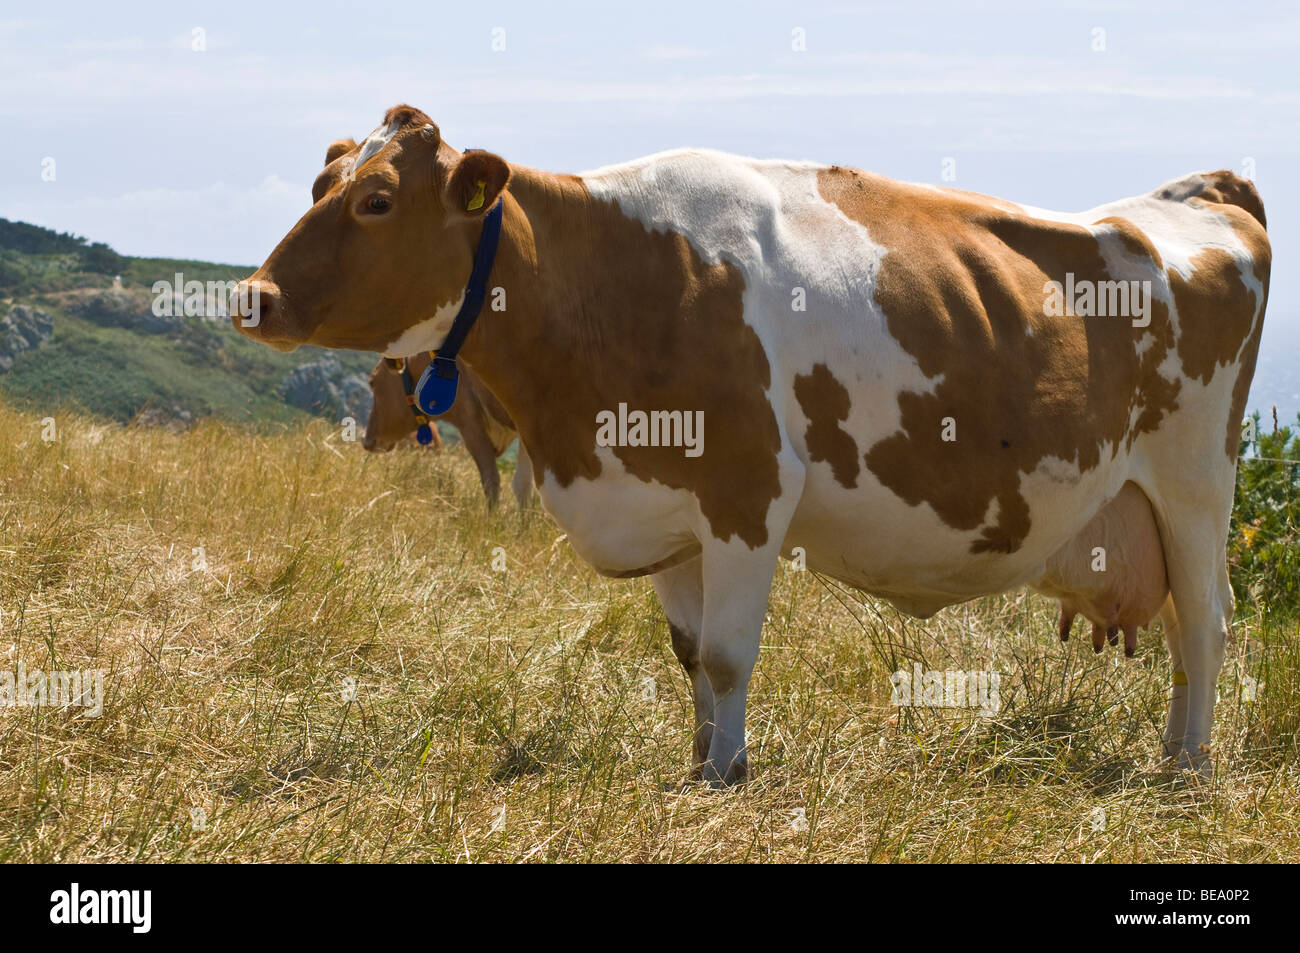 dh Guernsey cow ANIMAL GUERNSEY Brown and white Guernsey cow standing pedigree dairy profile livestock milk cows cattle uk Stock Photo